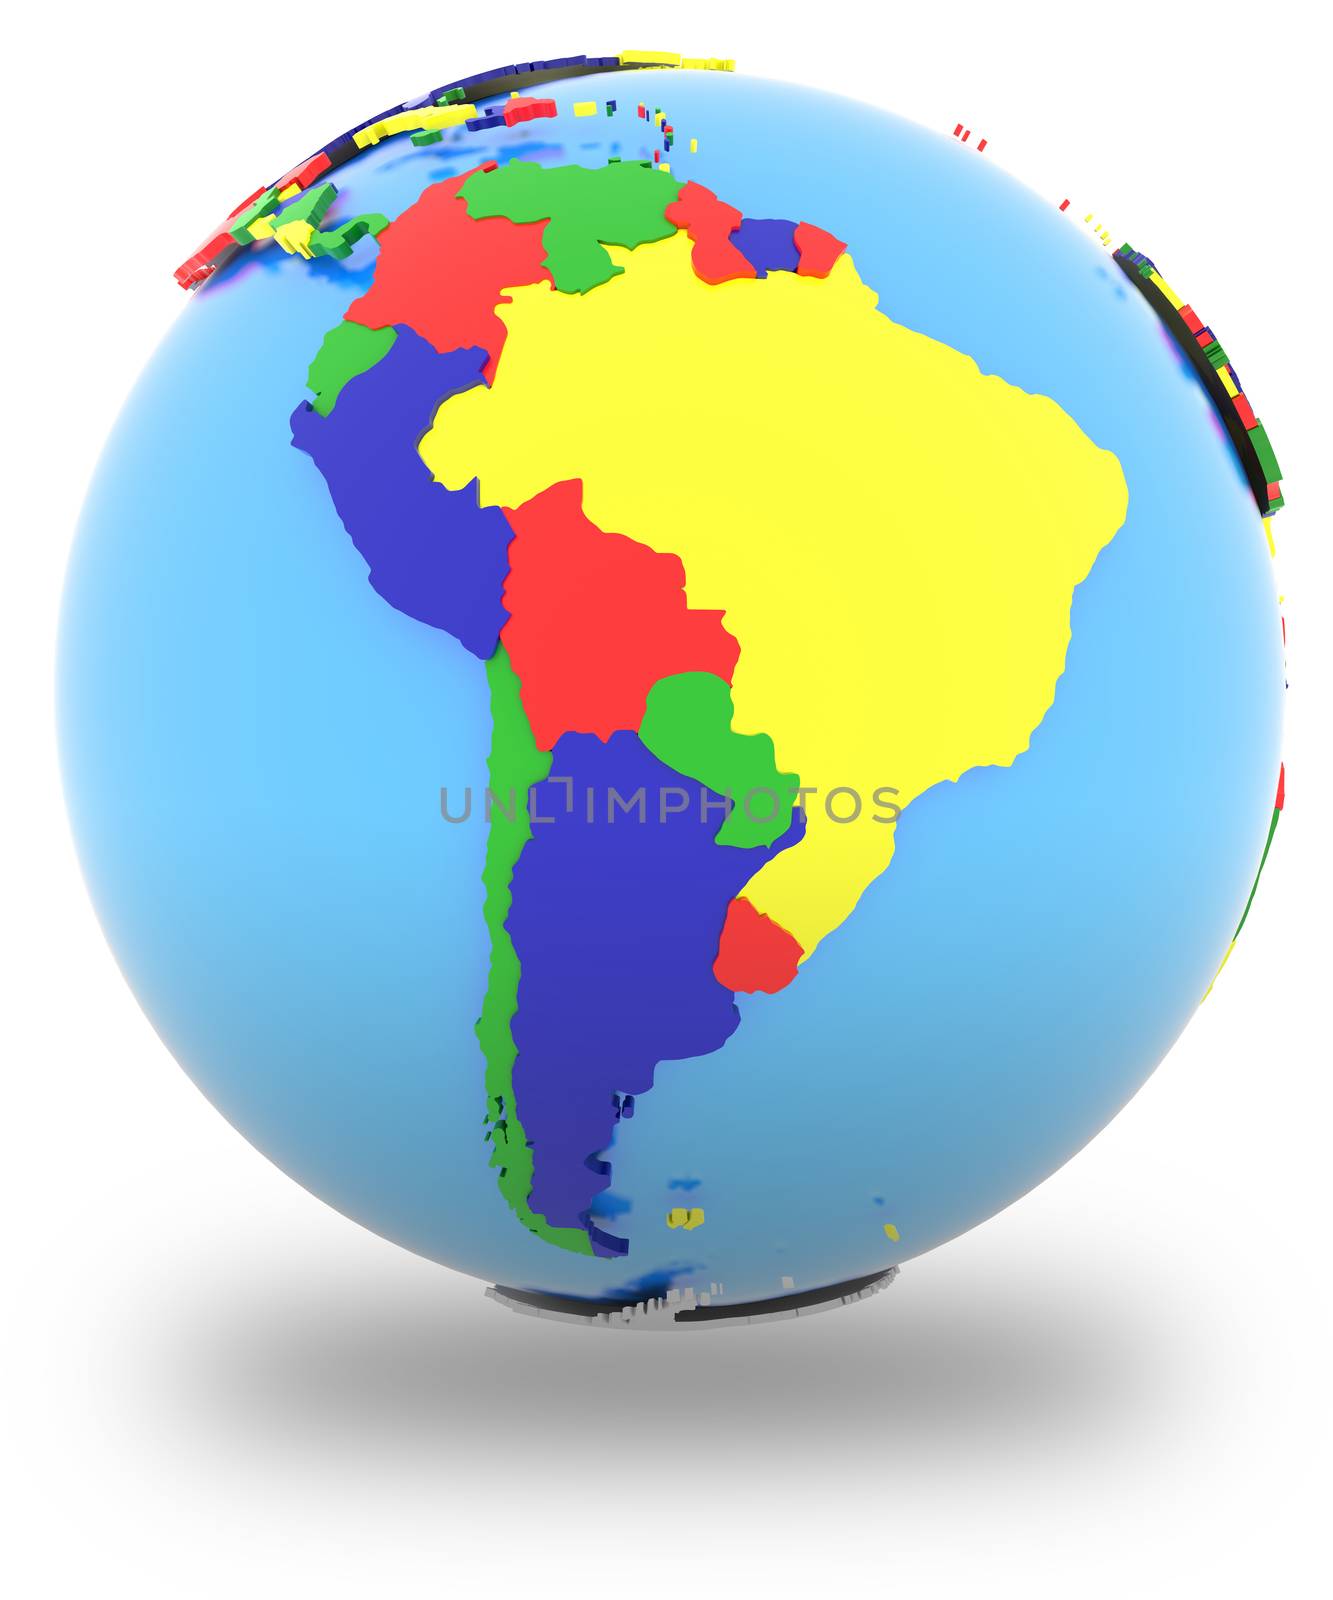 South America on the globe by Harvepino